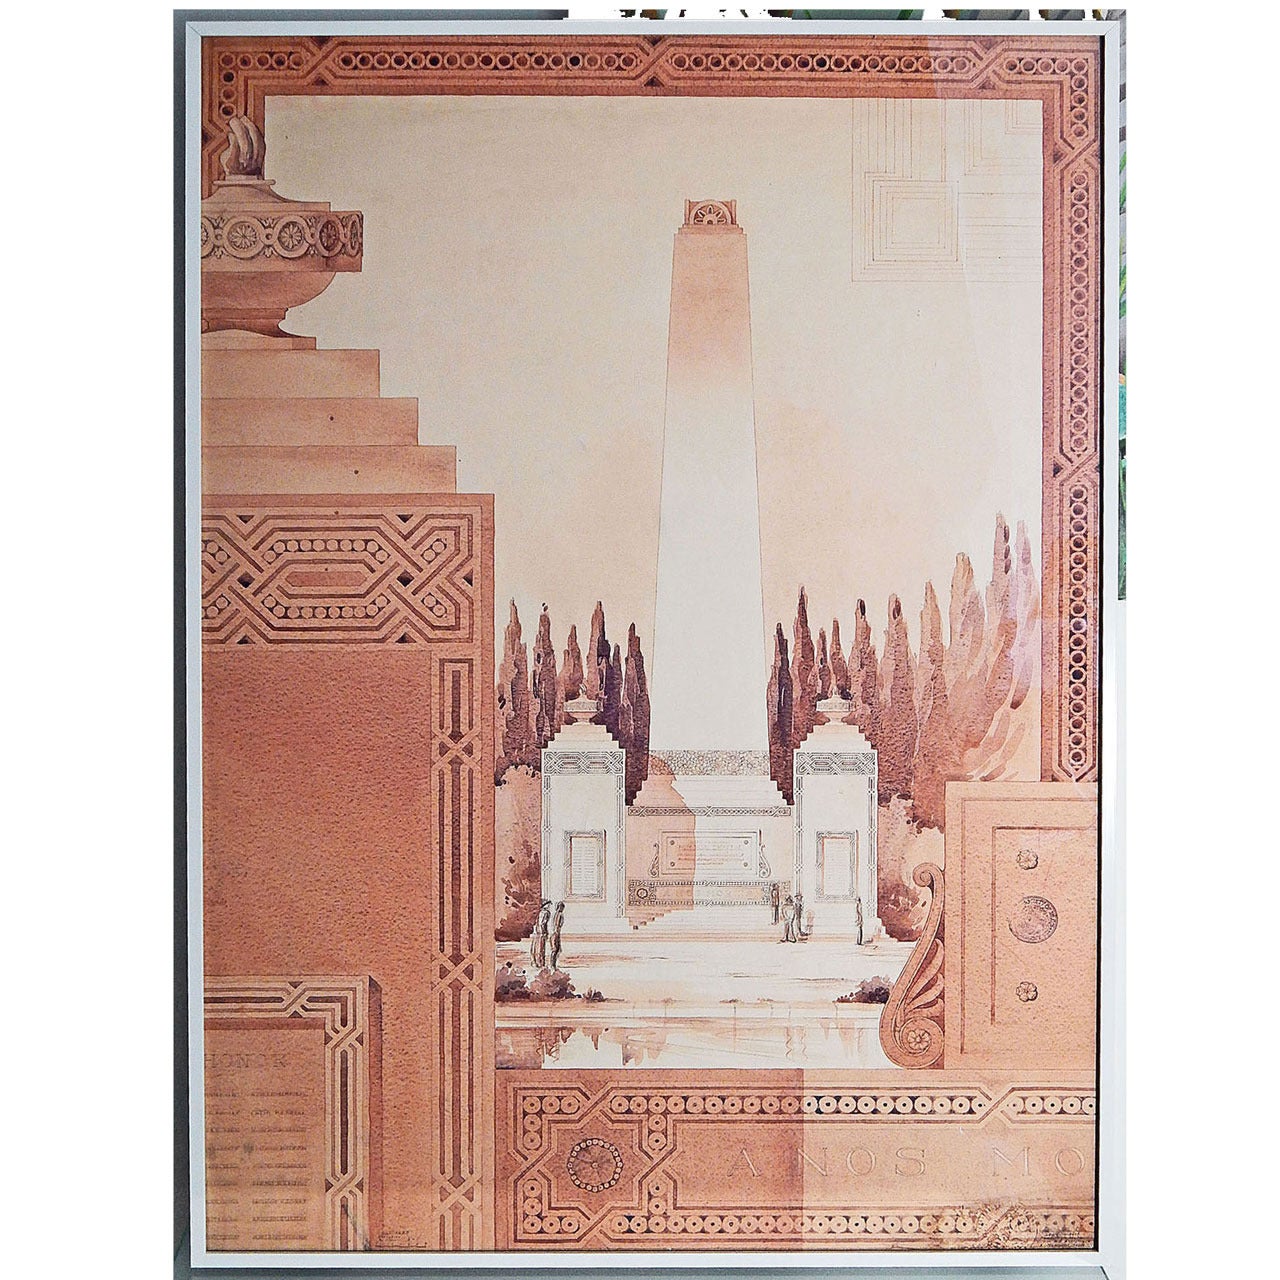 "A Memorial Shaft, " Large, Art Deco Architectural Rendering by Seibert, 1930